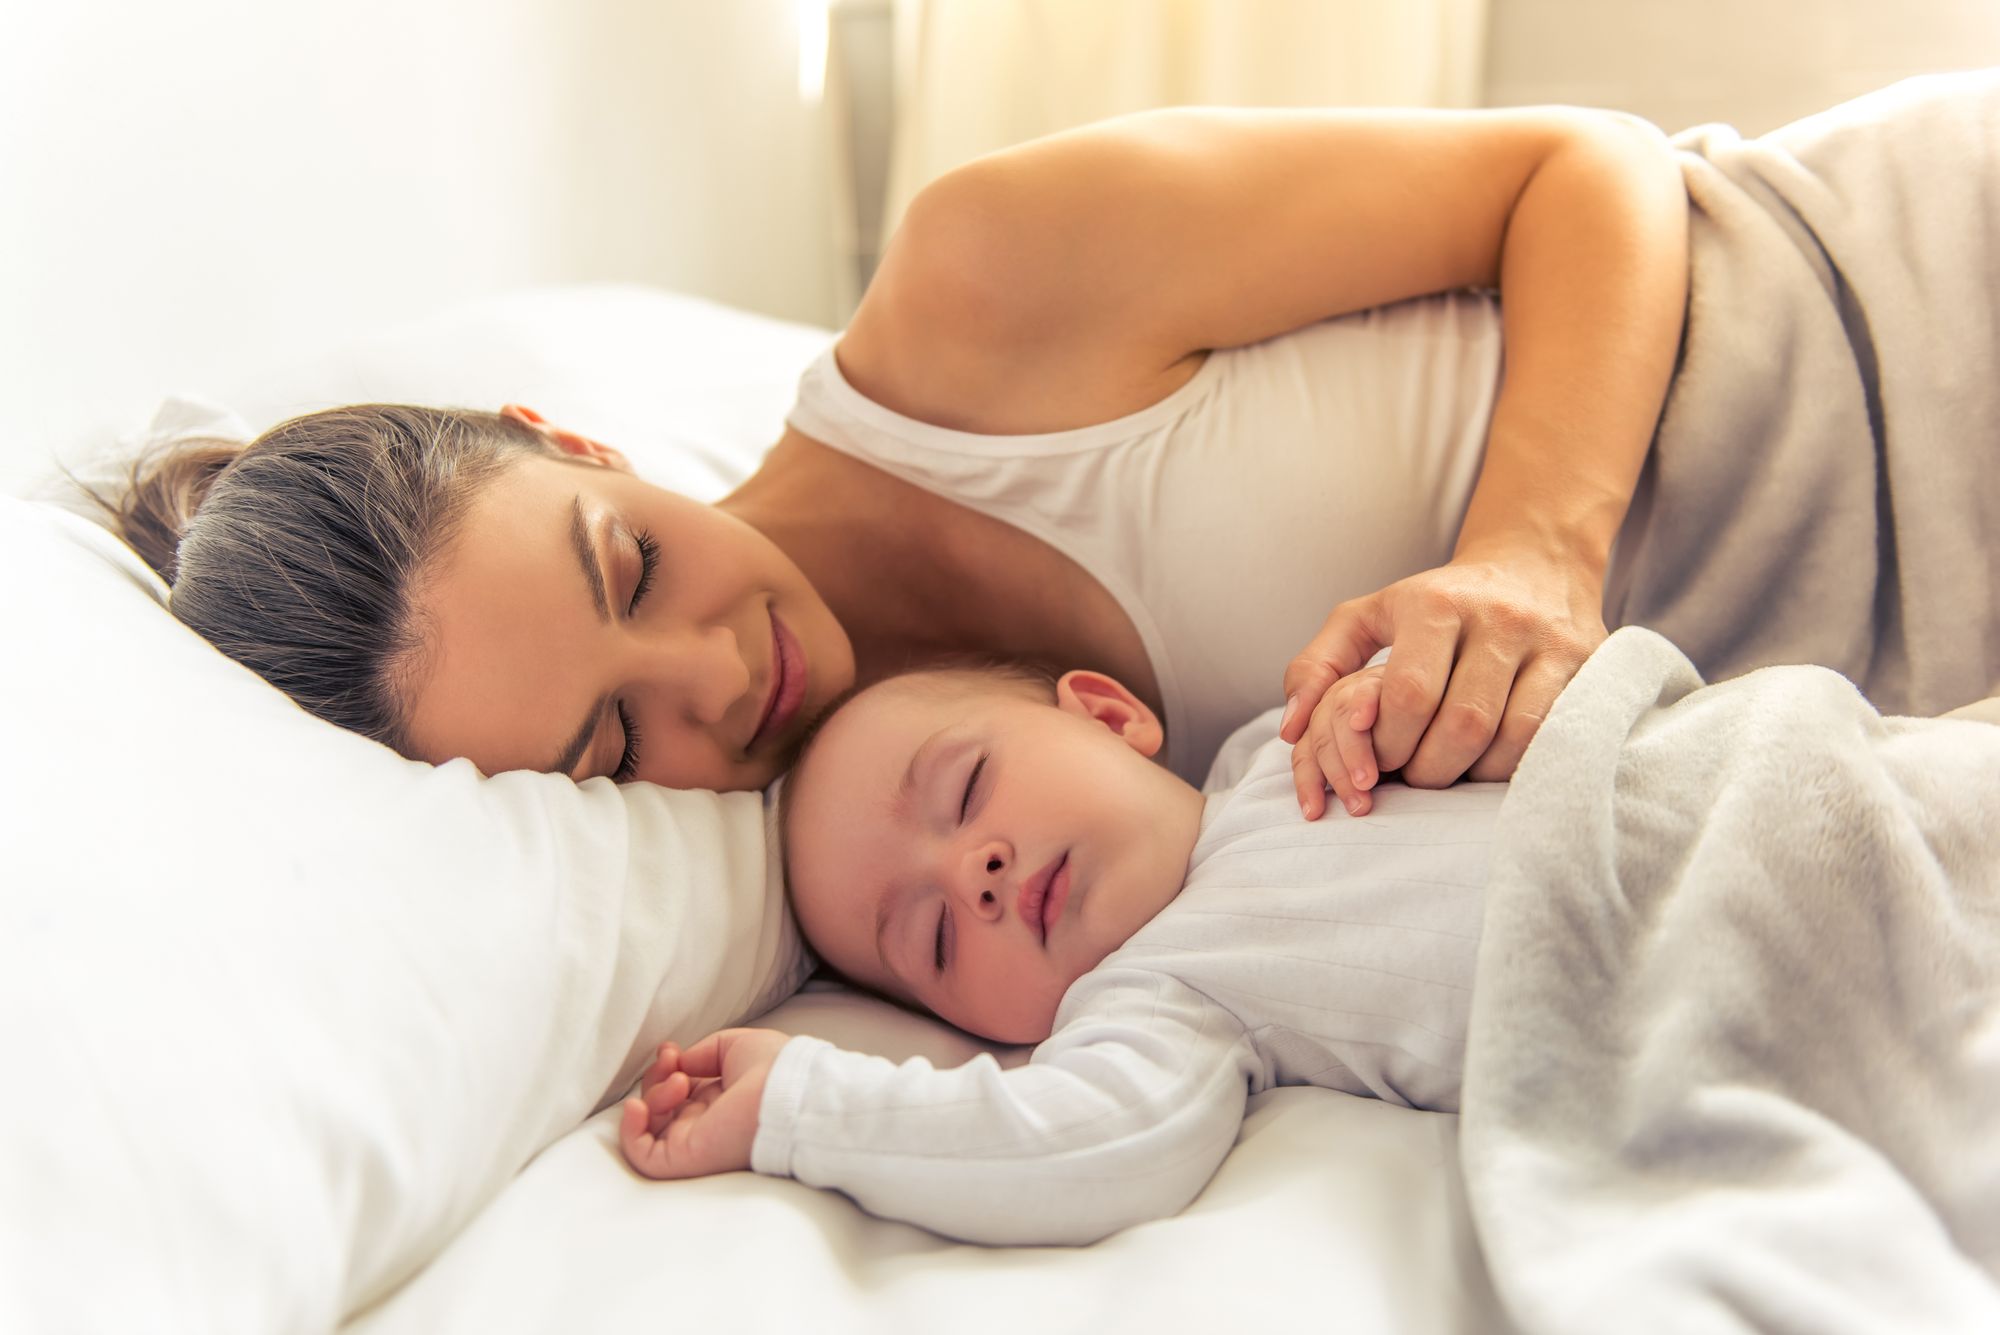 Mom And Baby Sleeping Together by George Rudy | www.shutterstock.com